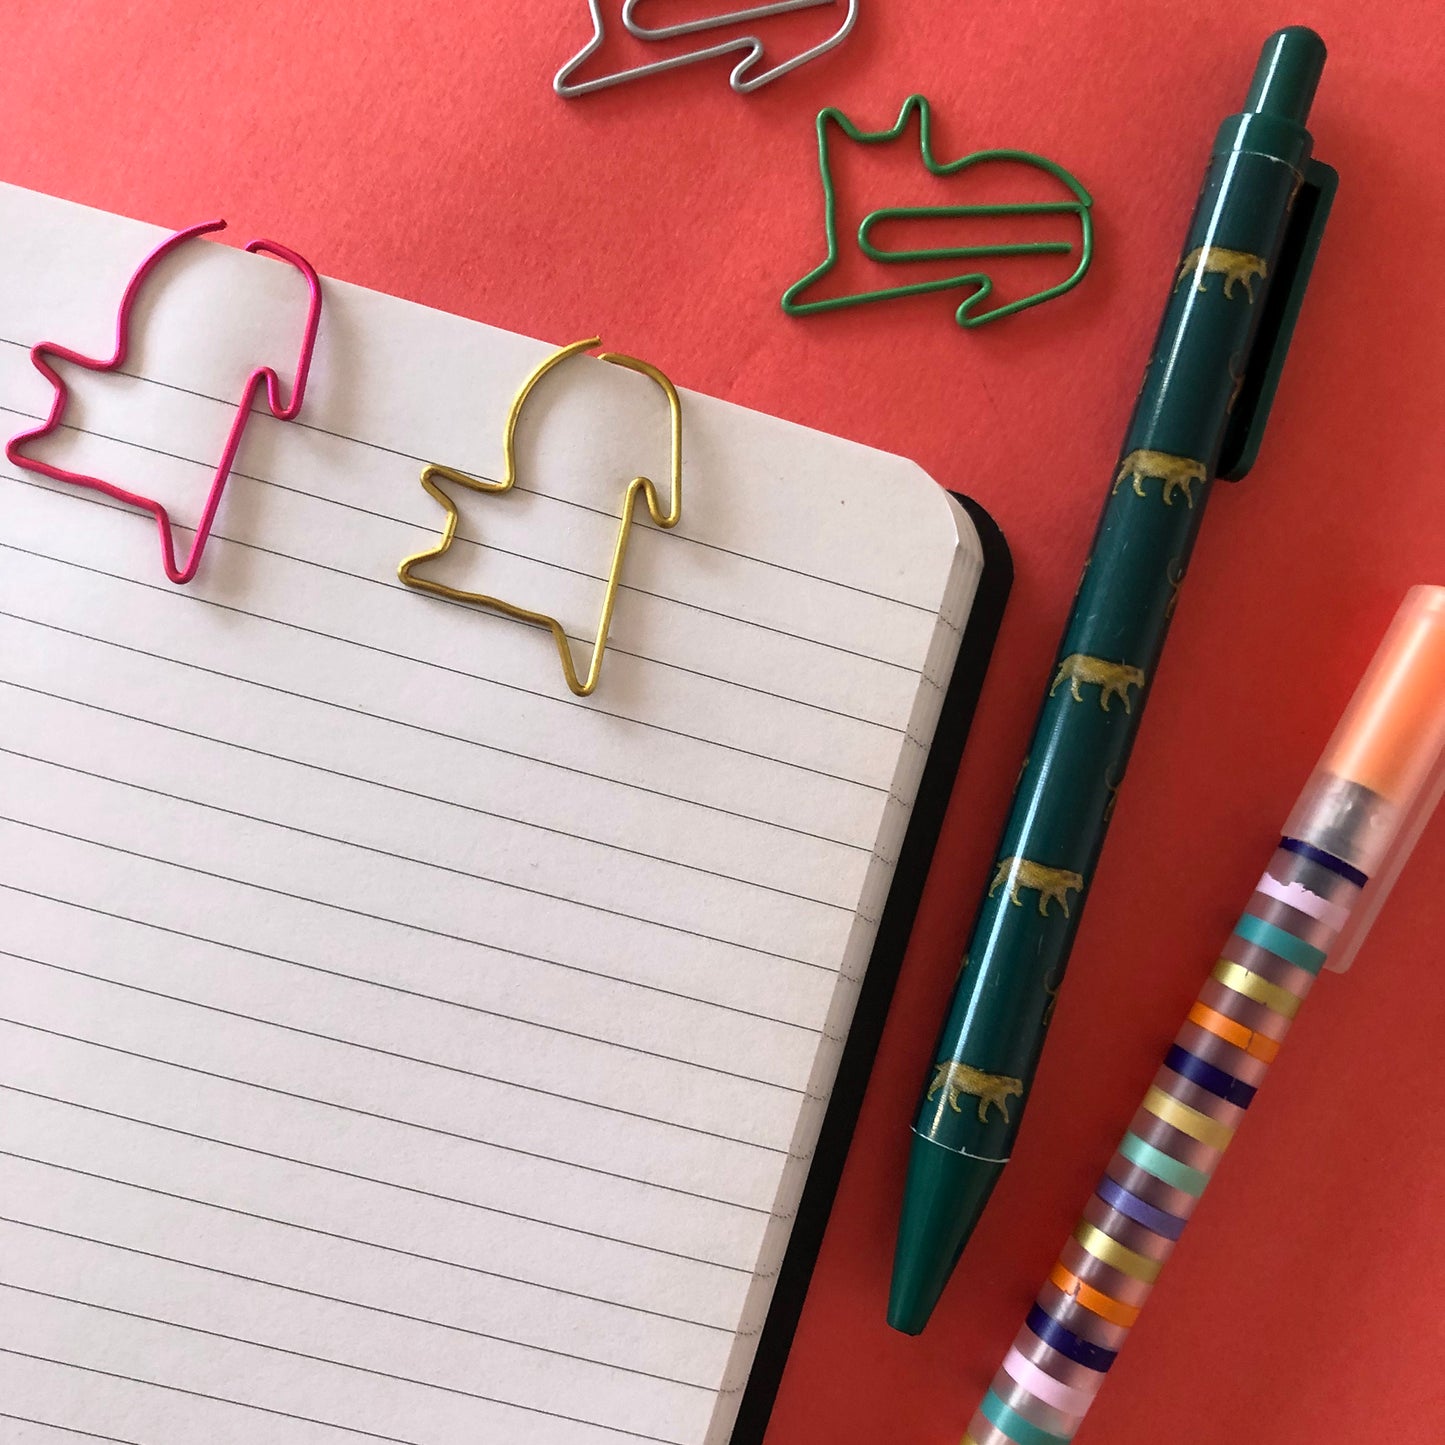 Image shows a set of cute and colourful, cat shaped paperclips.